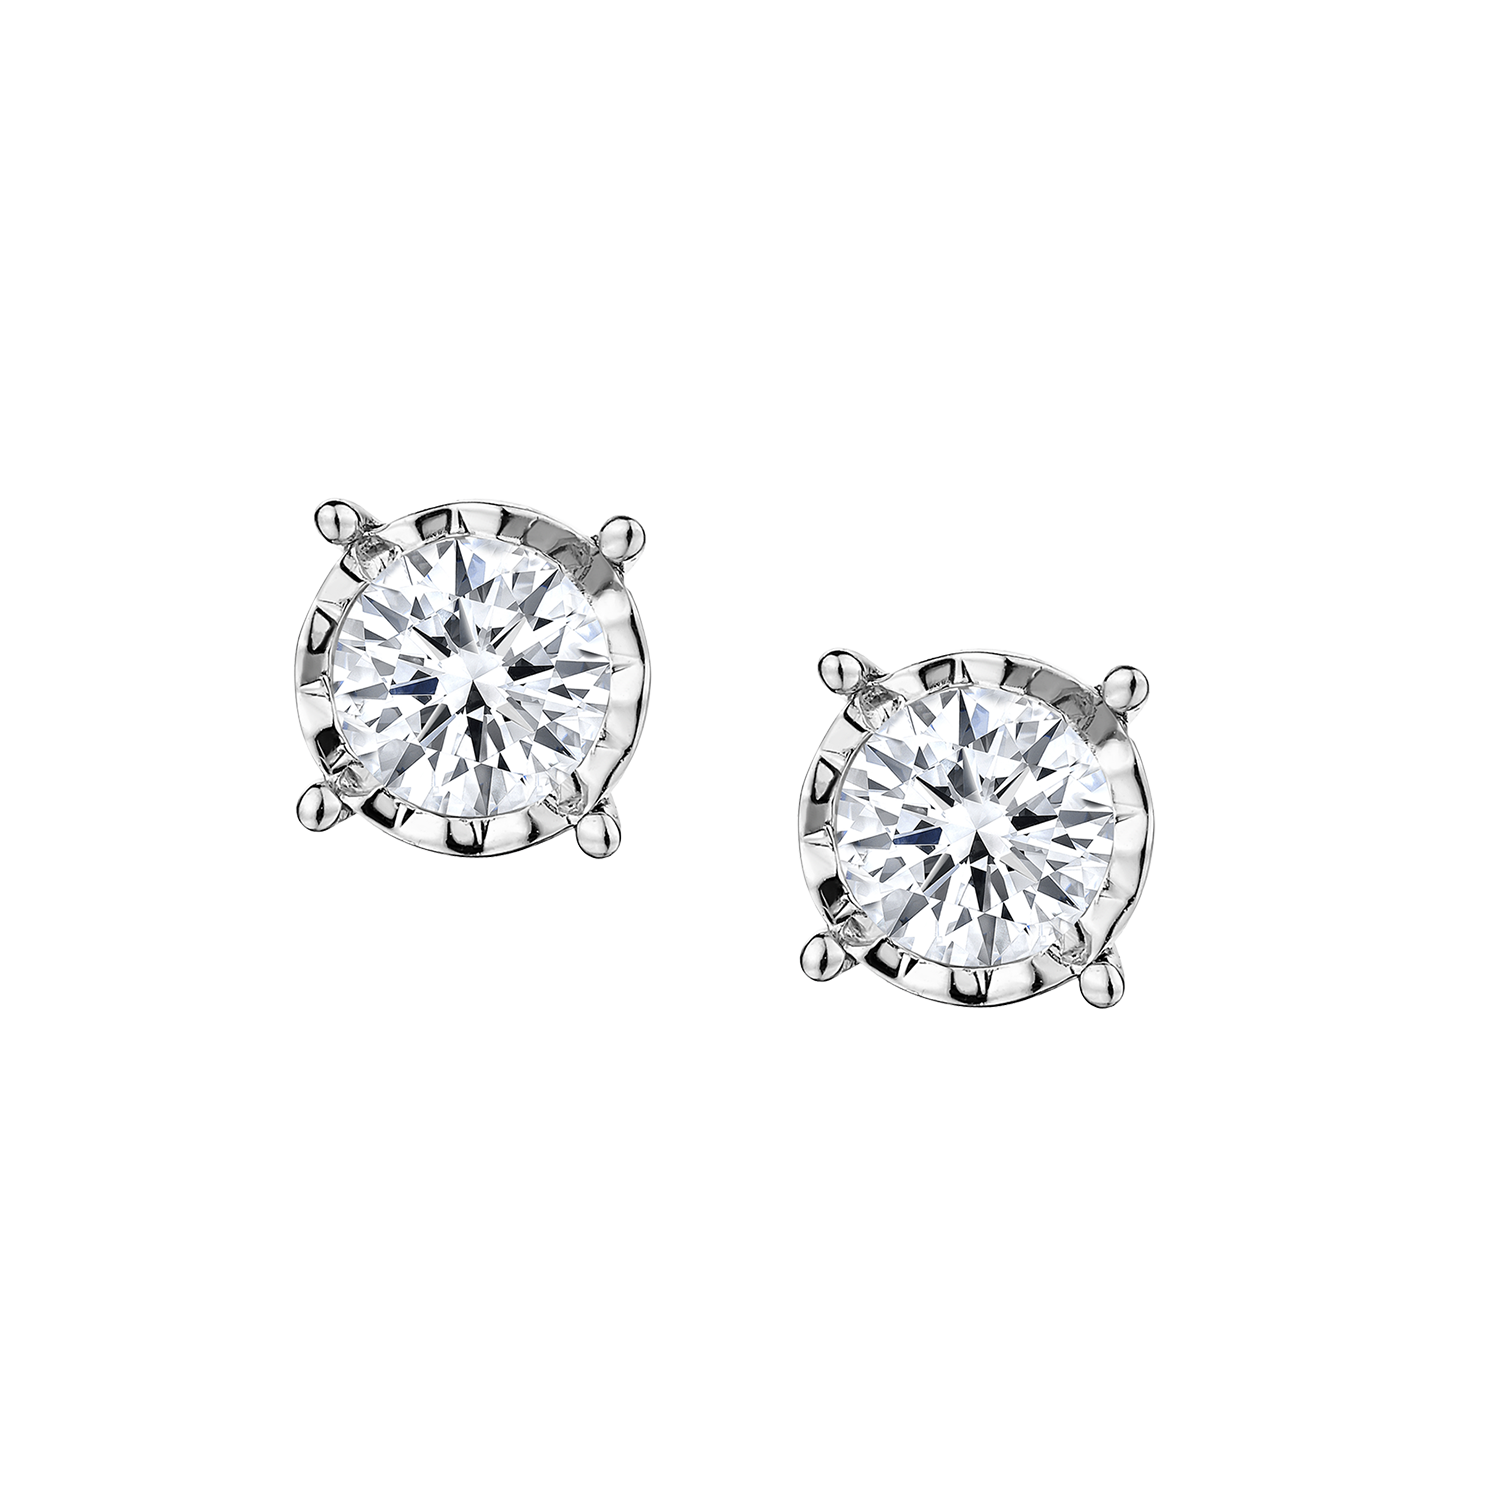 .50 CARAT DIAMOND "MIRACLE" EARRINGS, 14kt WHITE GOLD.....................NOW